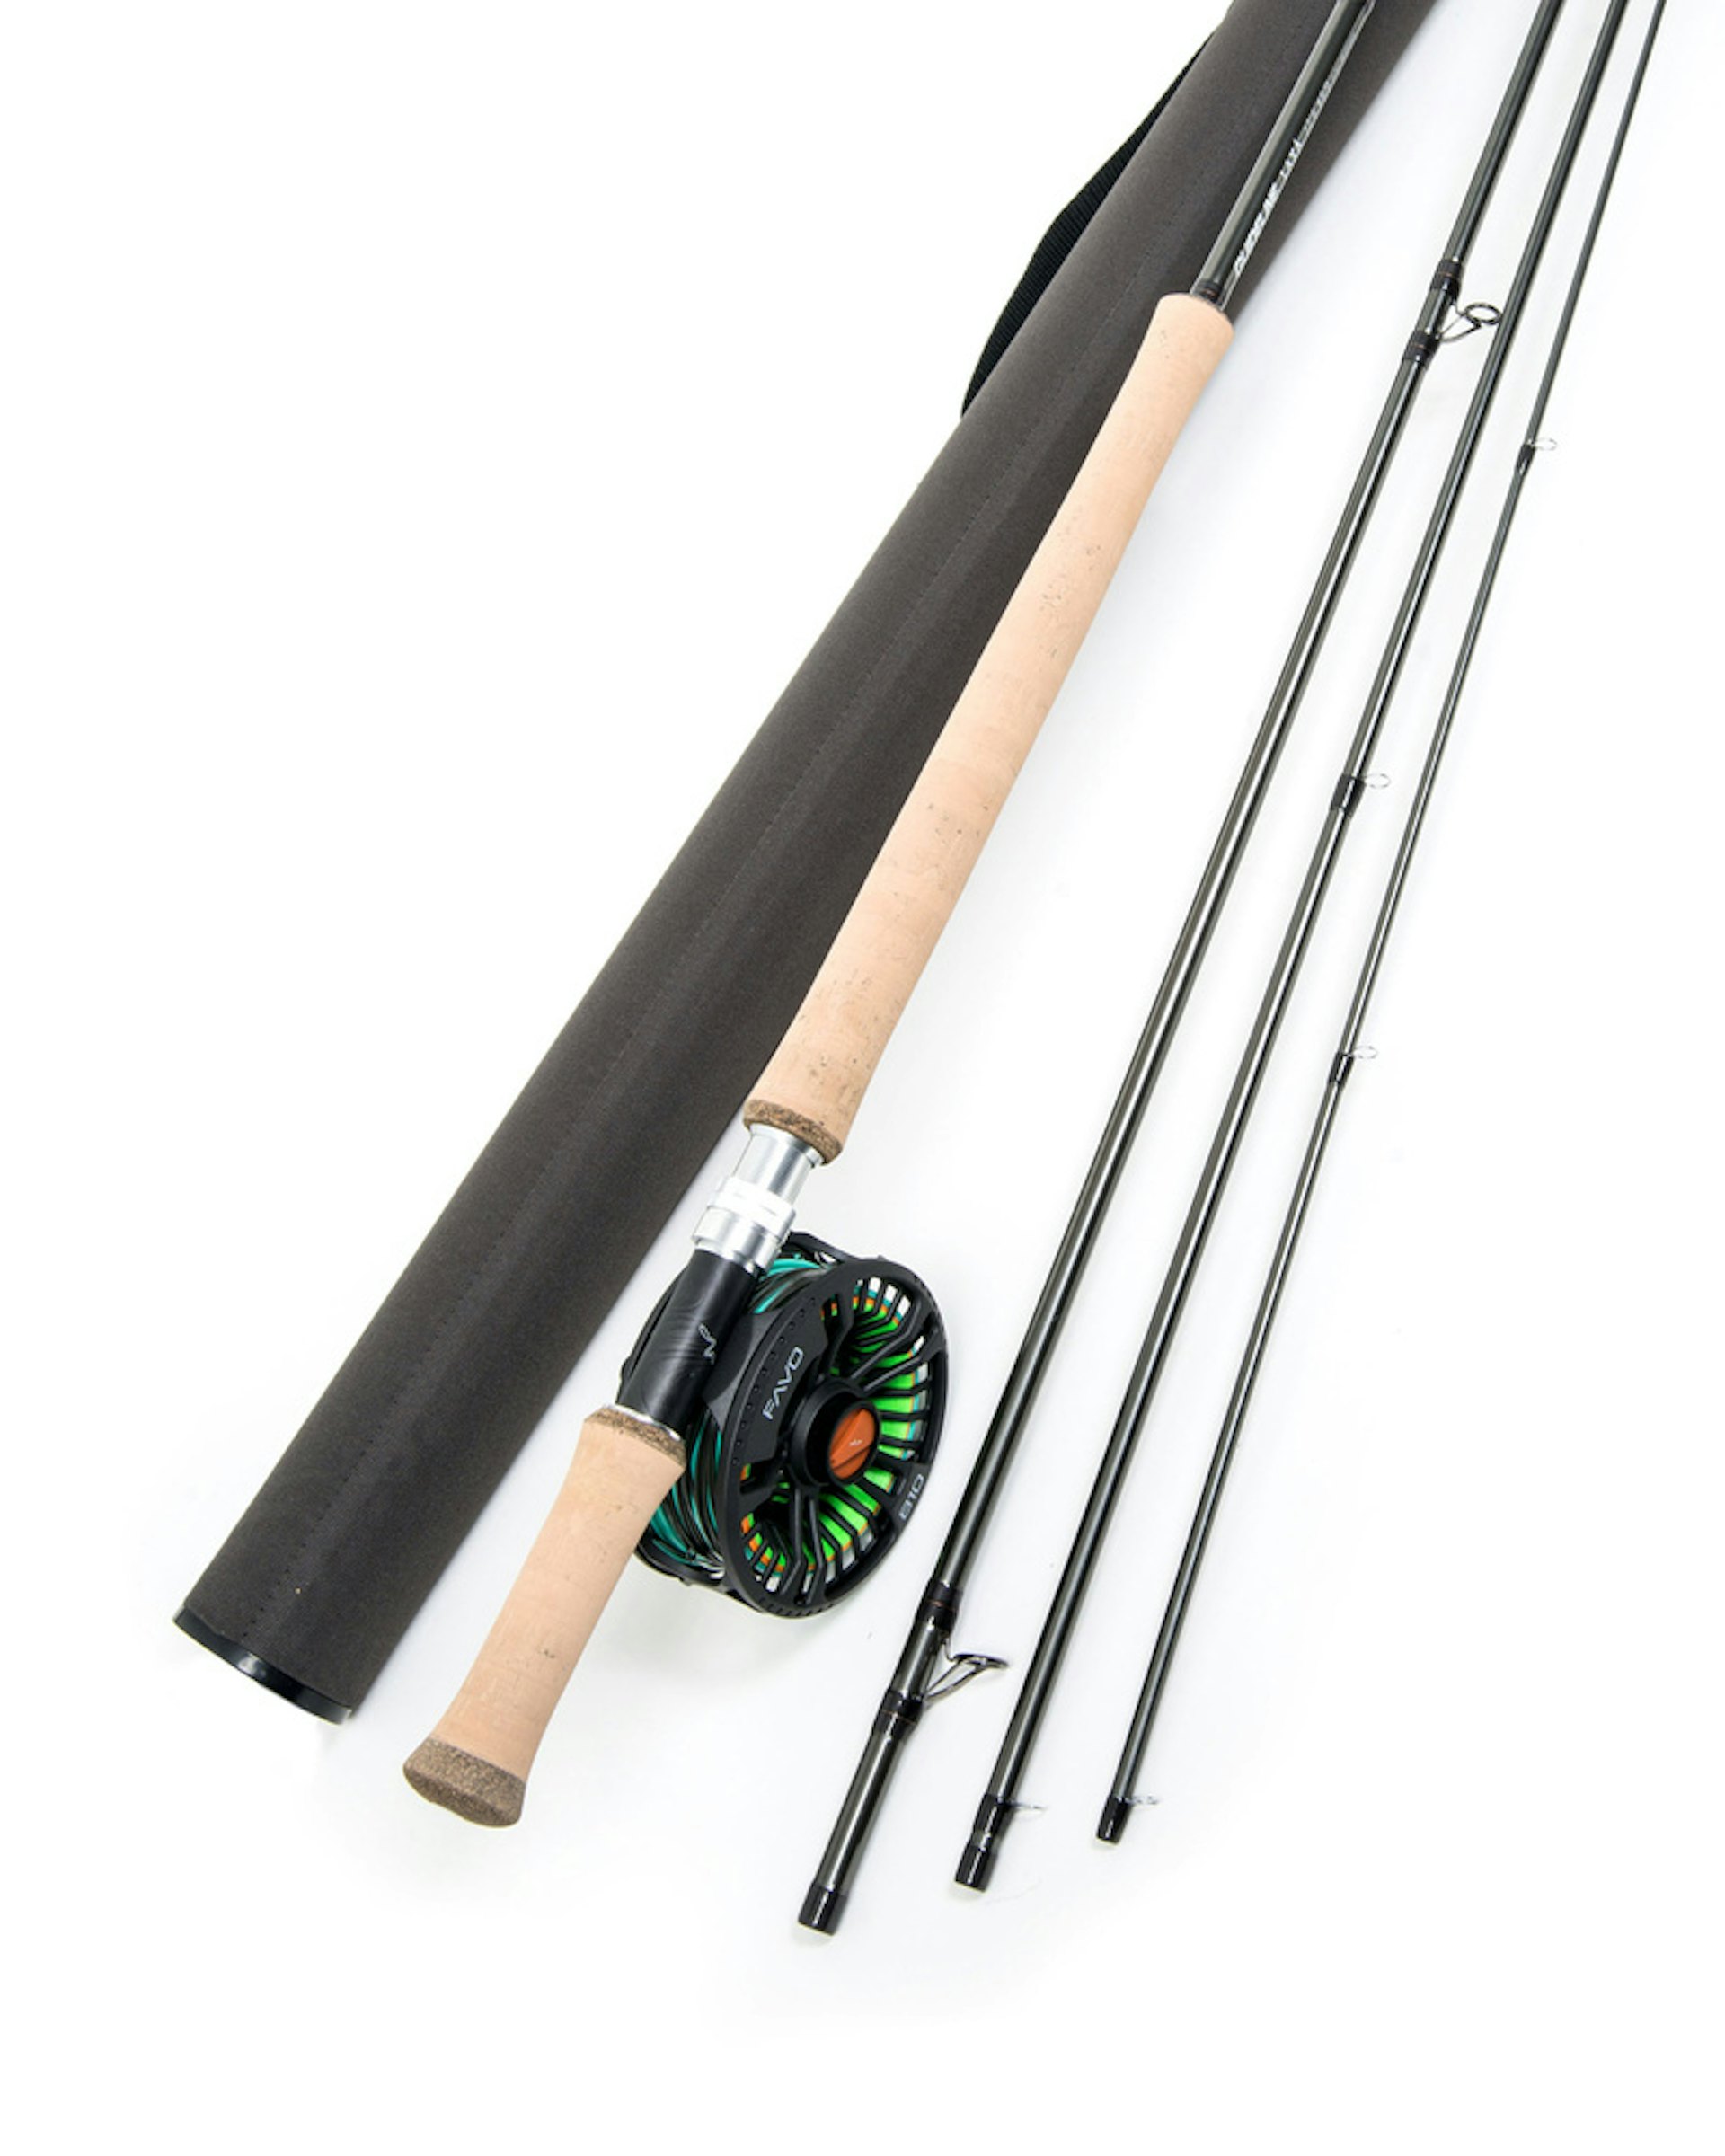 The Laxa Seatrout Fishing Rod Kit - Guideline Fly Fish Canada